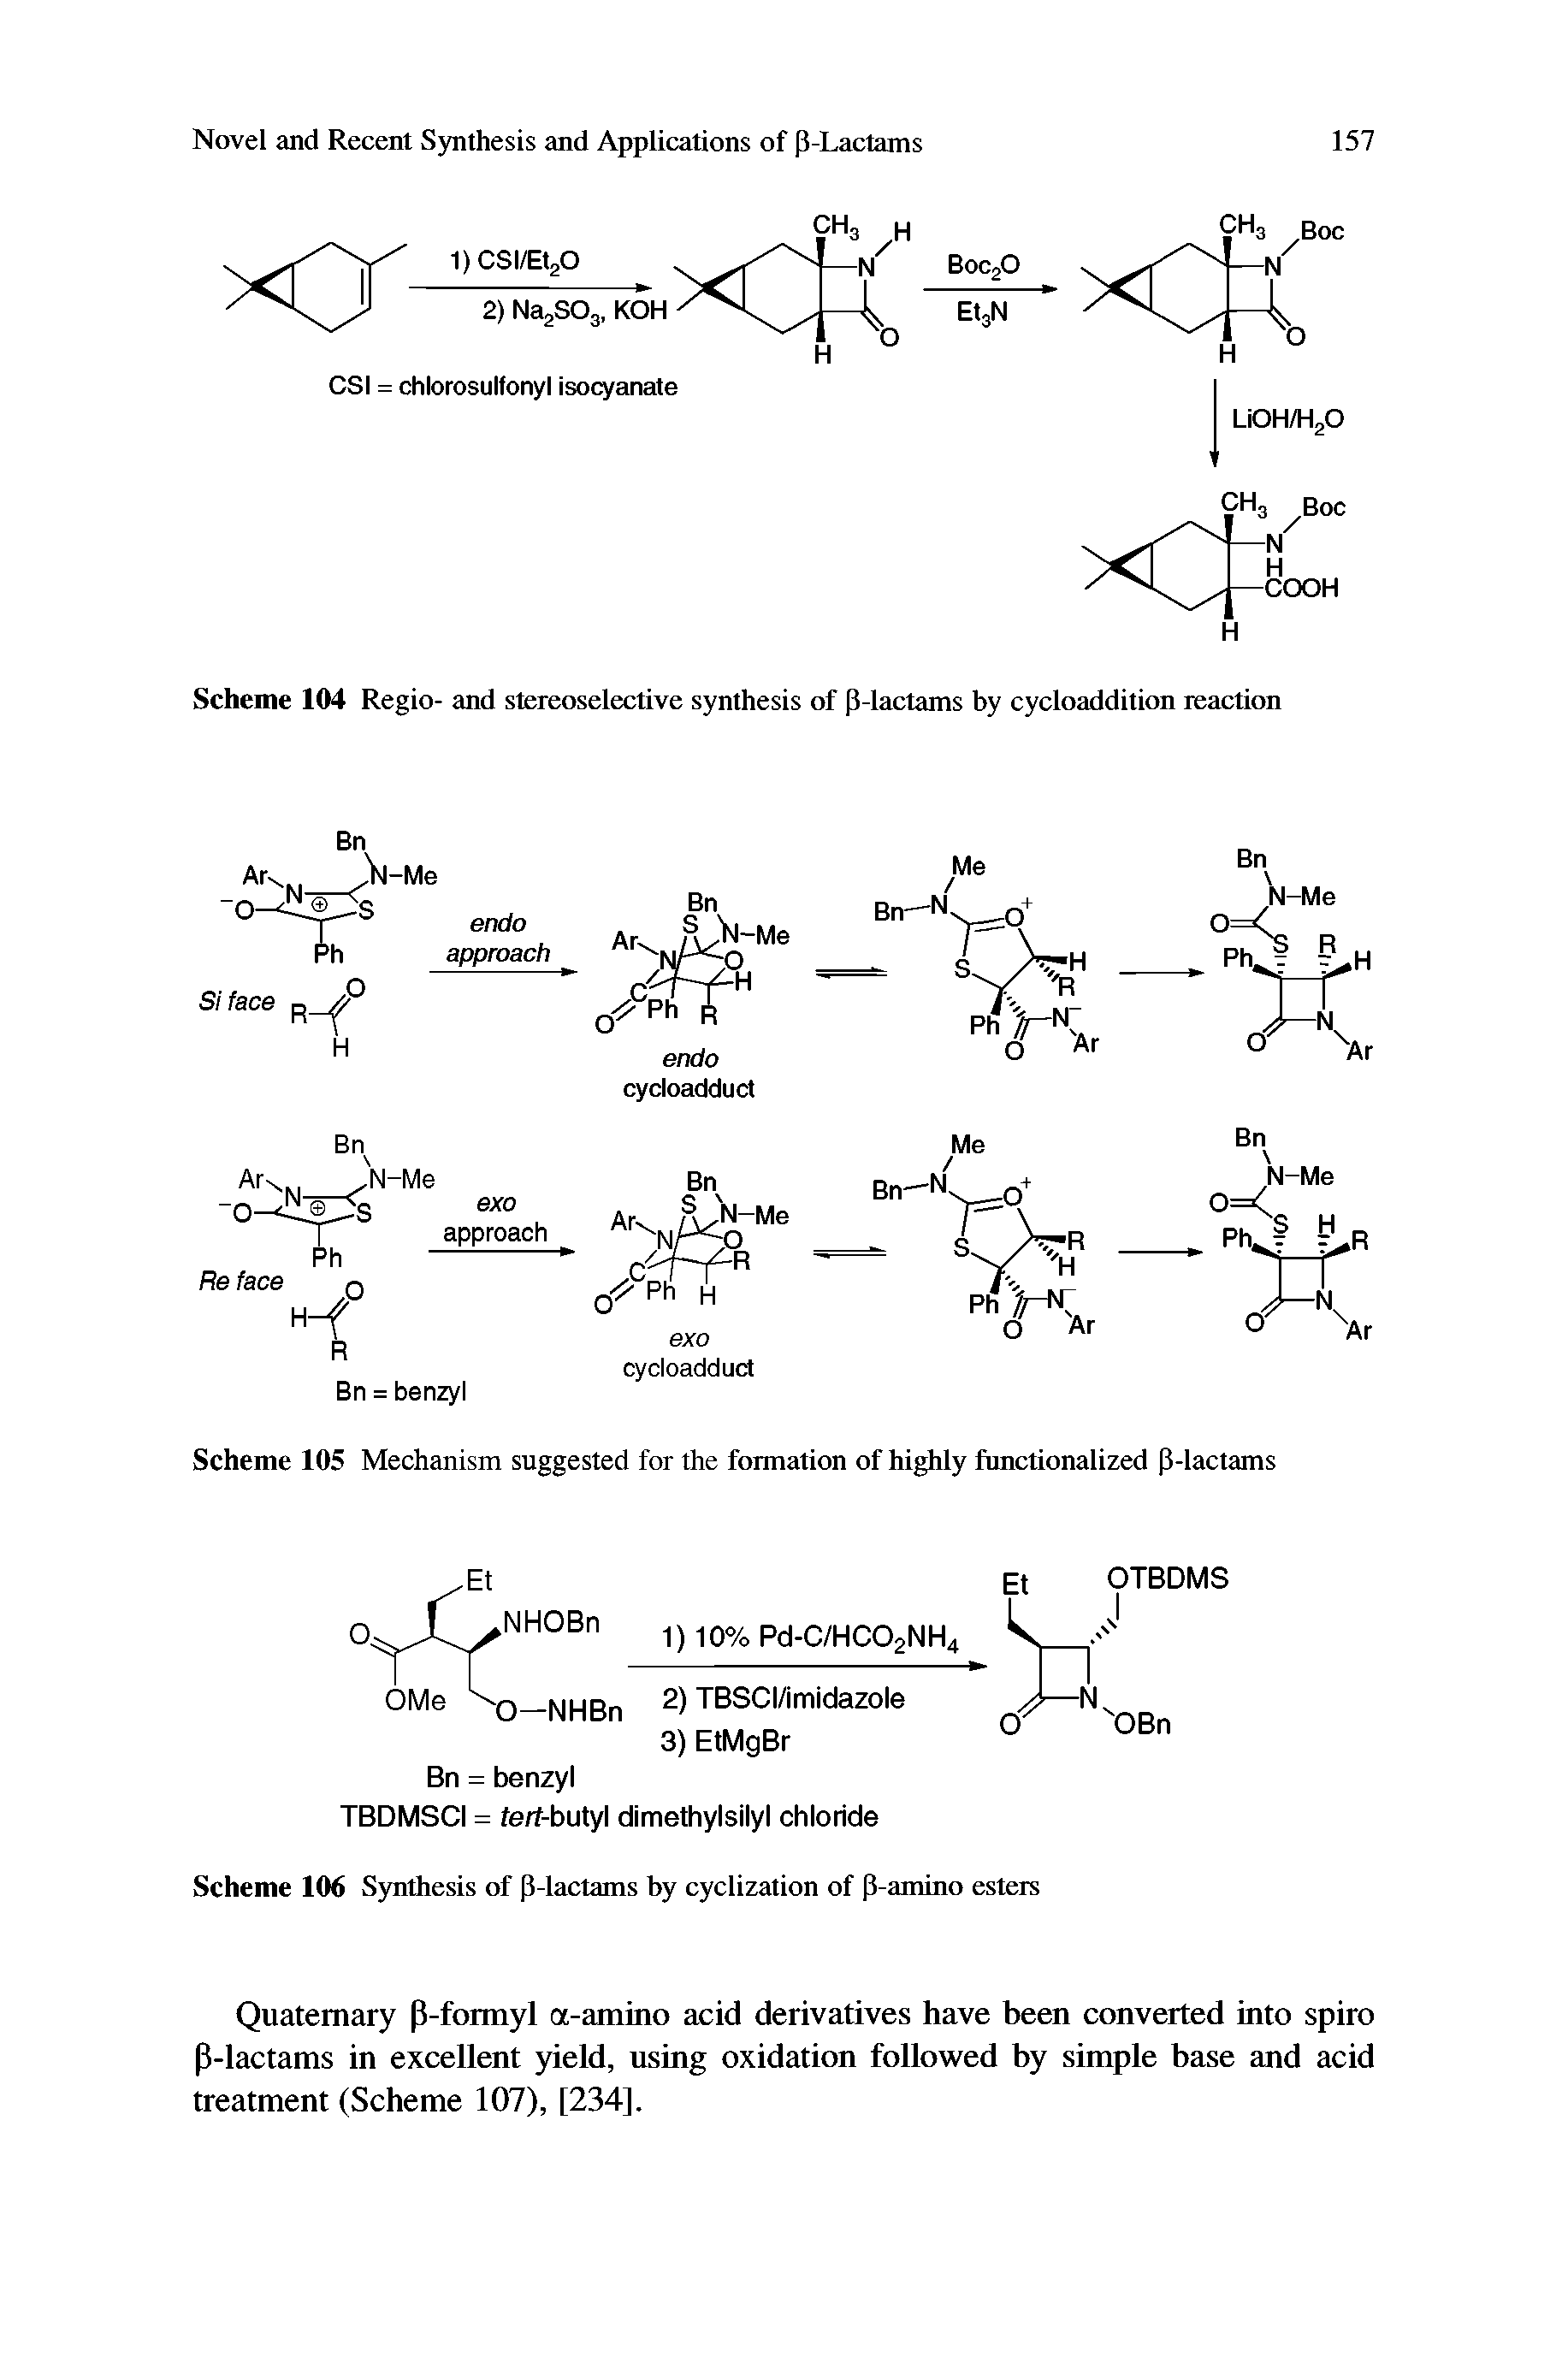 Scheme 104 Regio- and stereoselective synthesis of P-lactams by cycloaddition reaction...